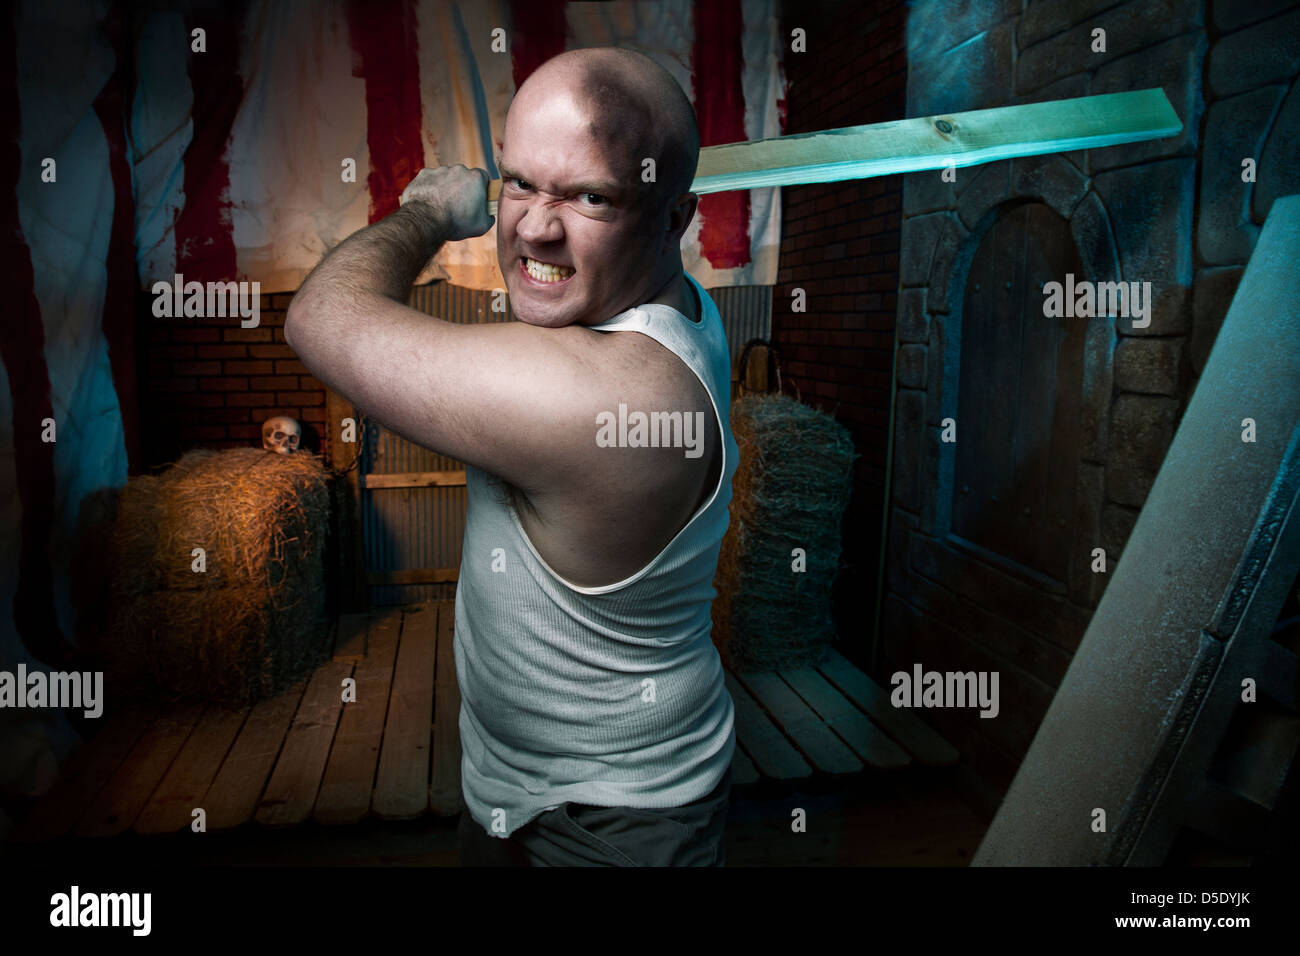 Man attacking with board in tented dark alley Stock Photo